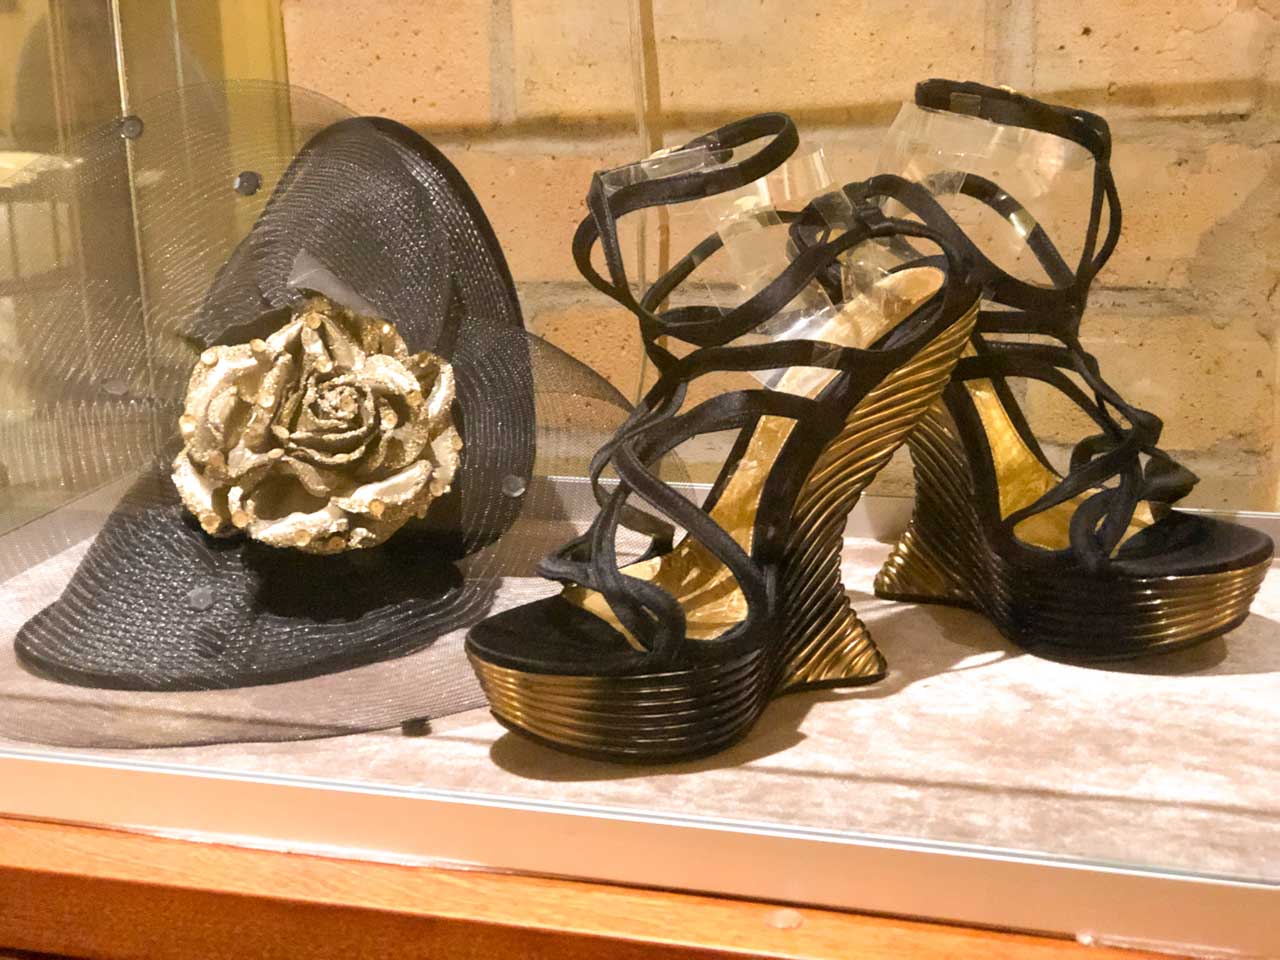 A fascinator hat and a pair of Alexander McQueen shoes on display at the Riga Fashion Museum